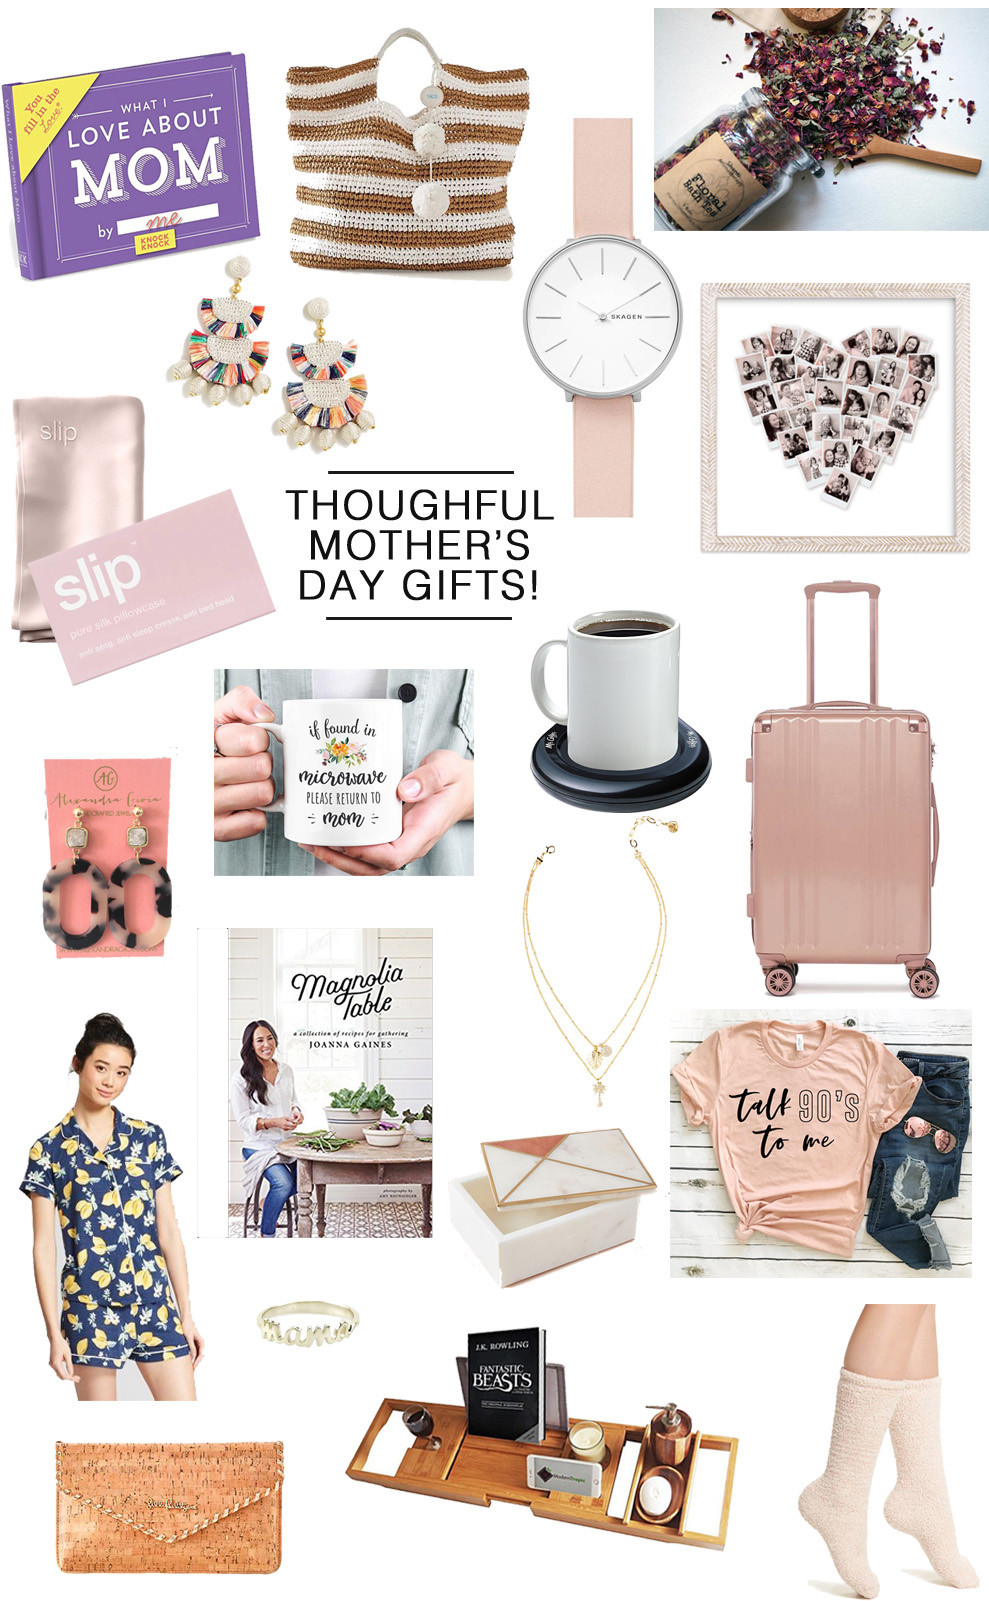 Thoughtful Mother's Day Gifts
 Super Thoughtful Mother s Day Gifts Life